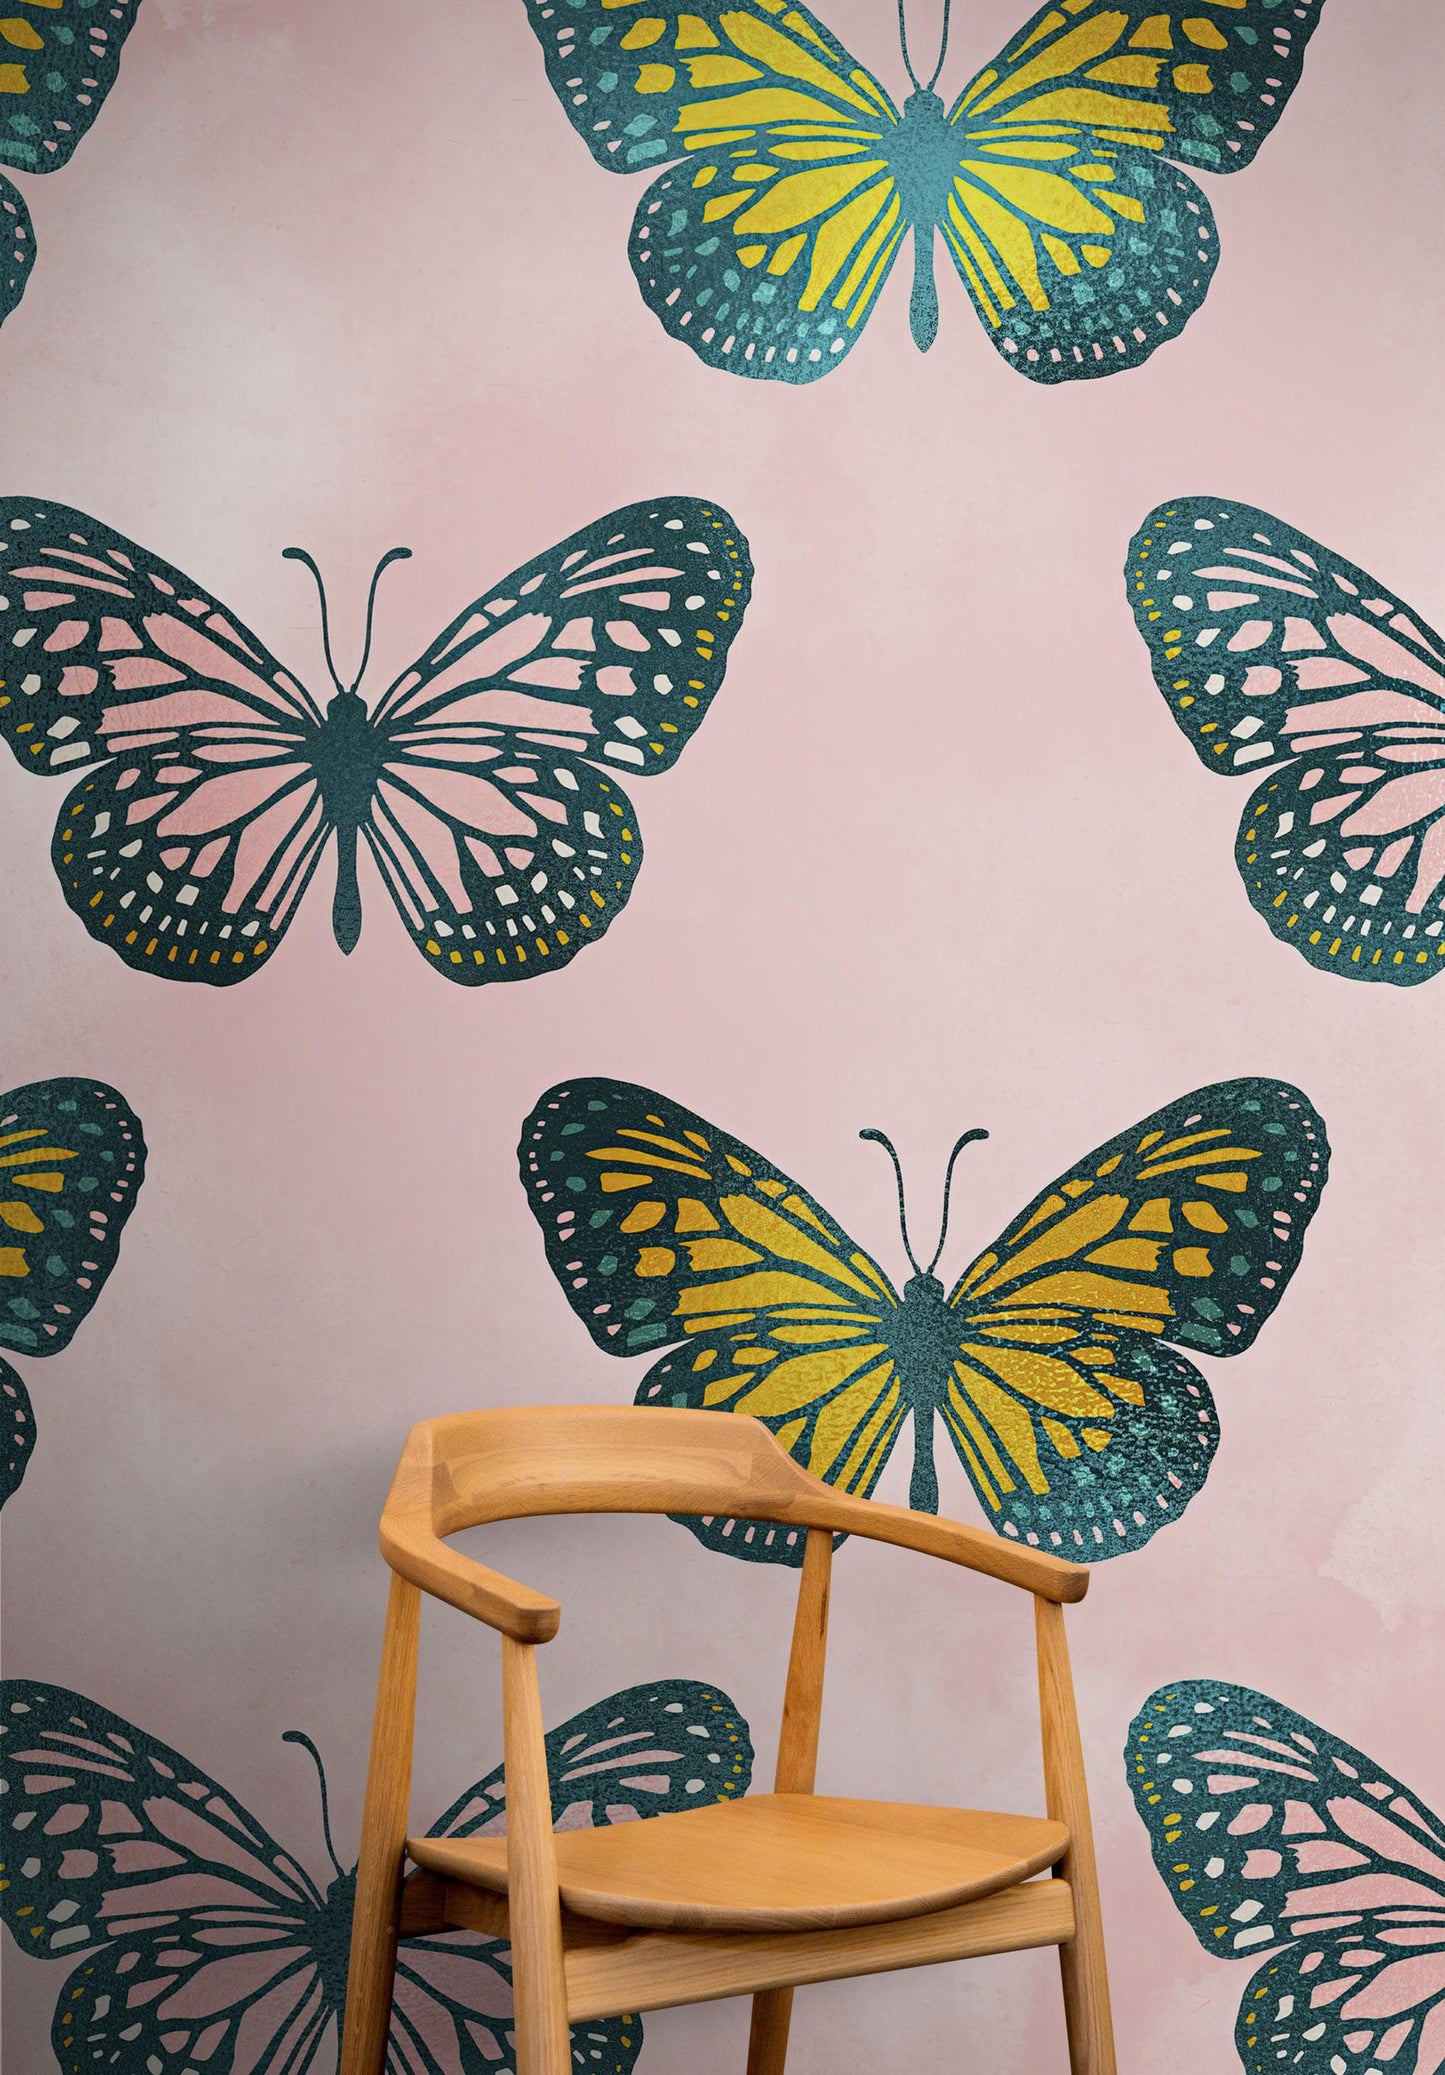 Large Butterfly Pattern on Pink Background Wall Mural. Bedroom, Nursery, Home Decor. Peel and Stick Wallpaper. #6441